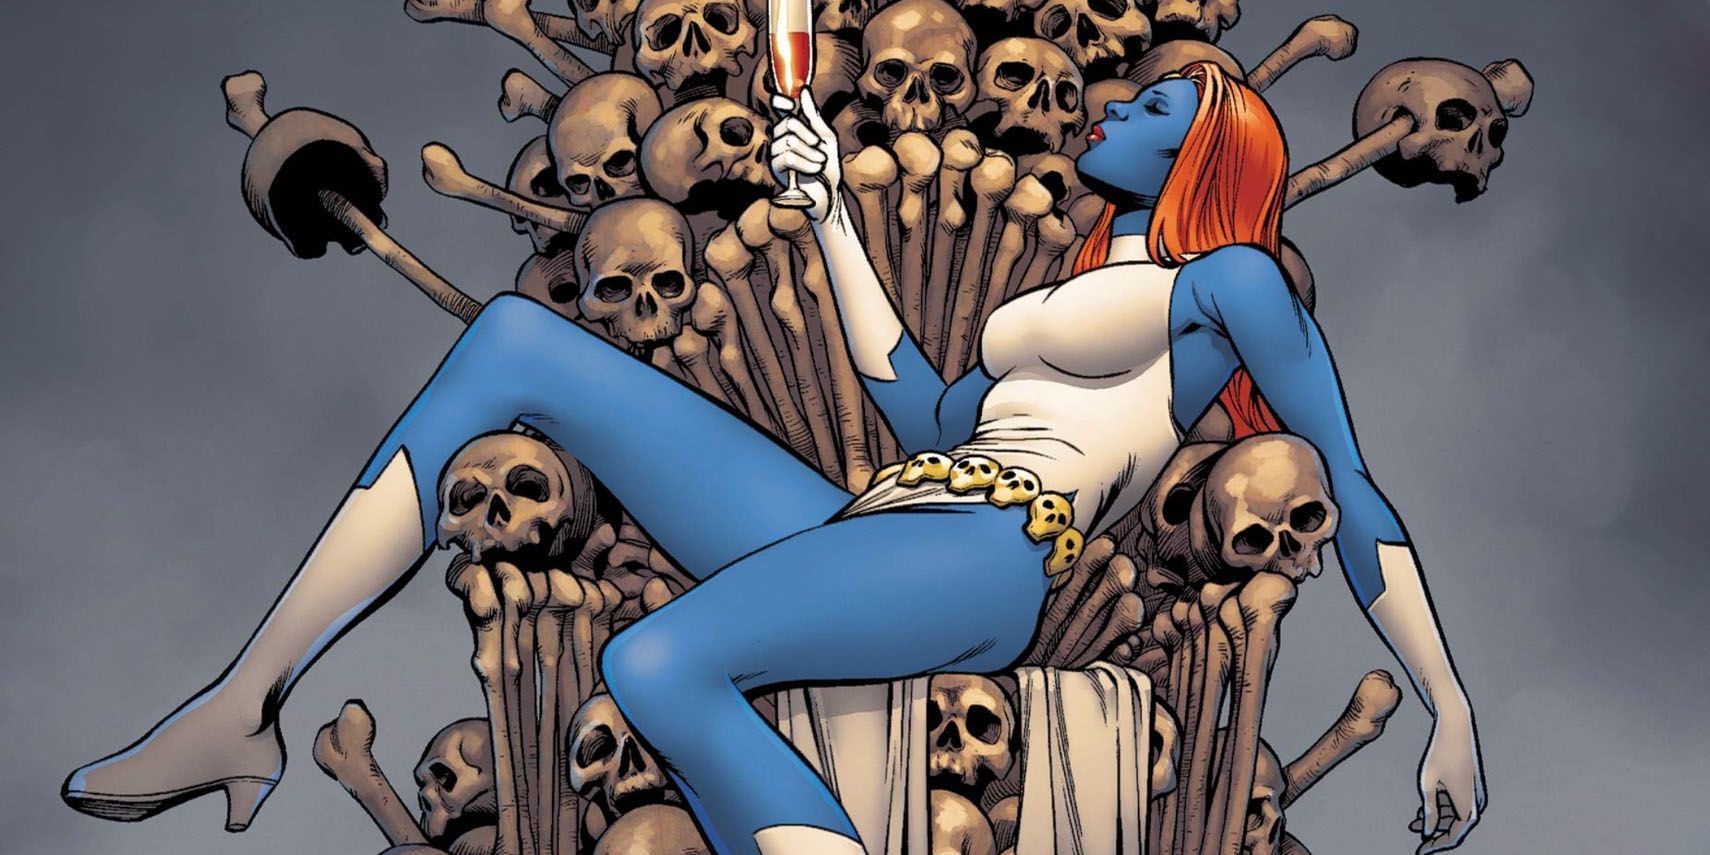 Animated Mystique on a throne of skulls